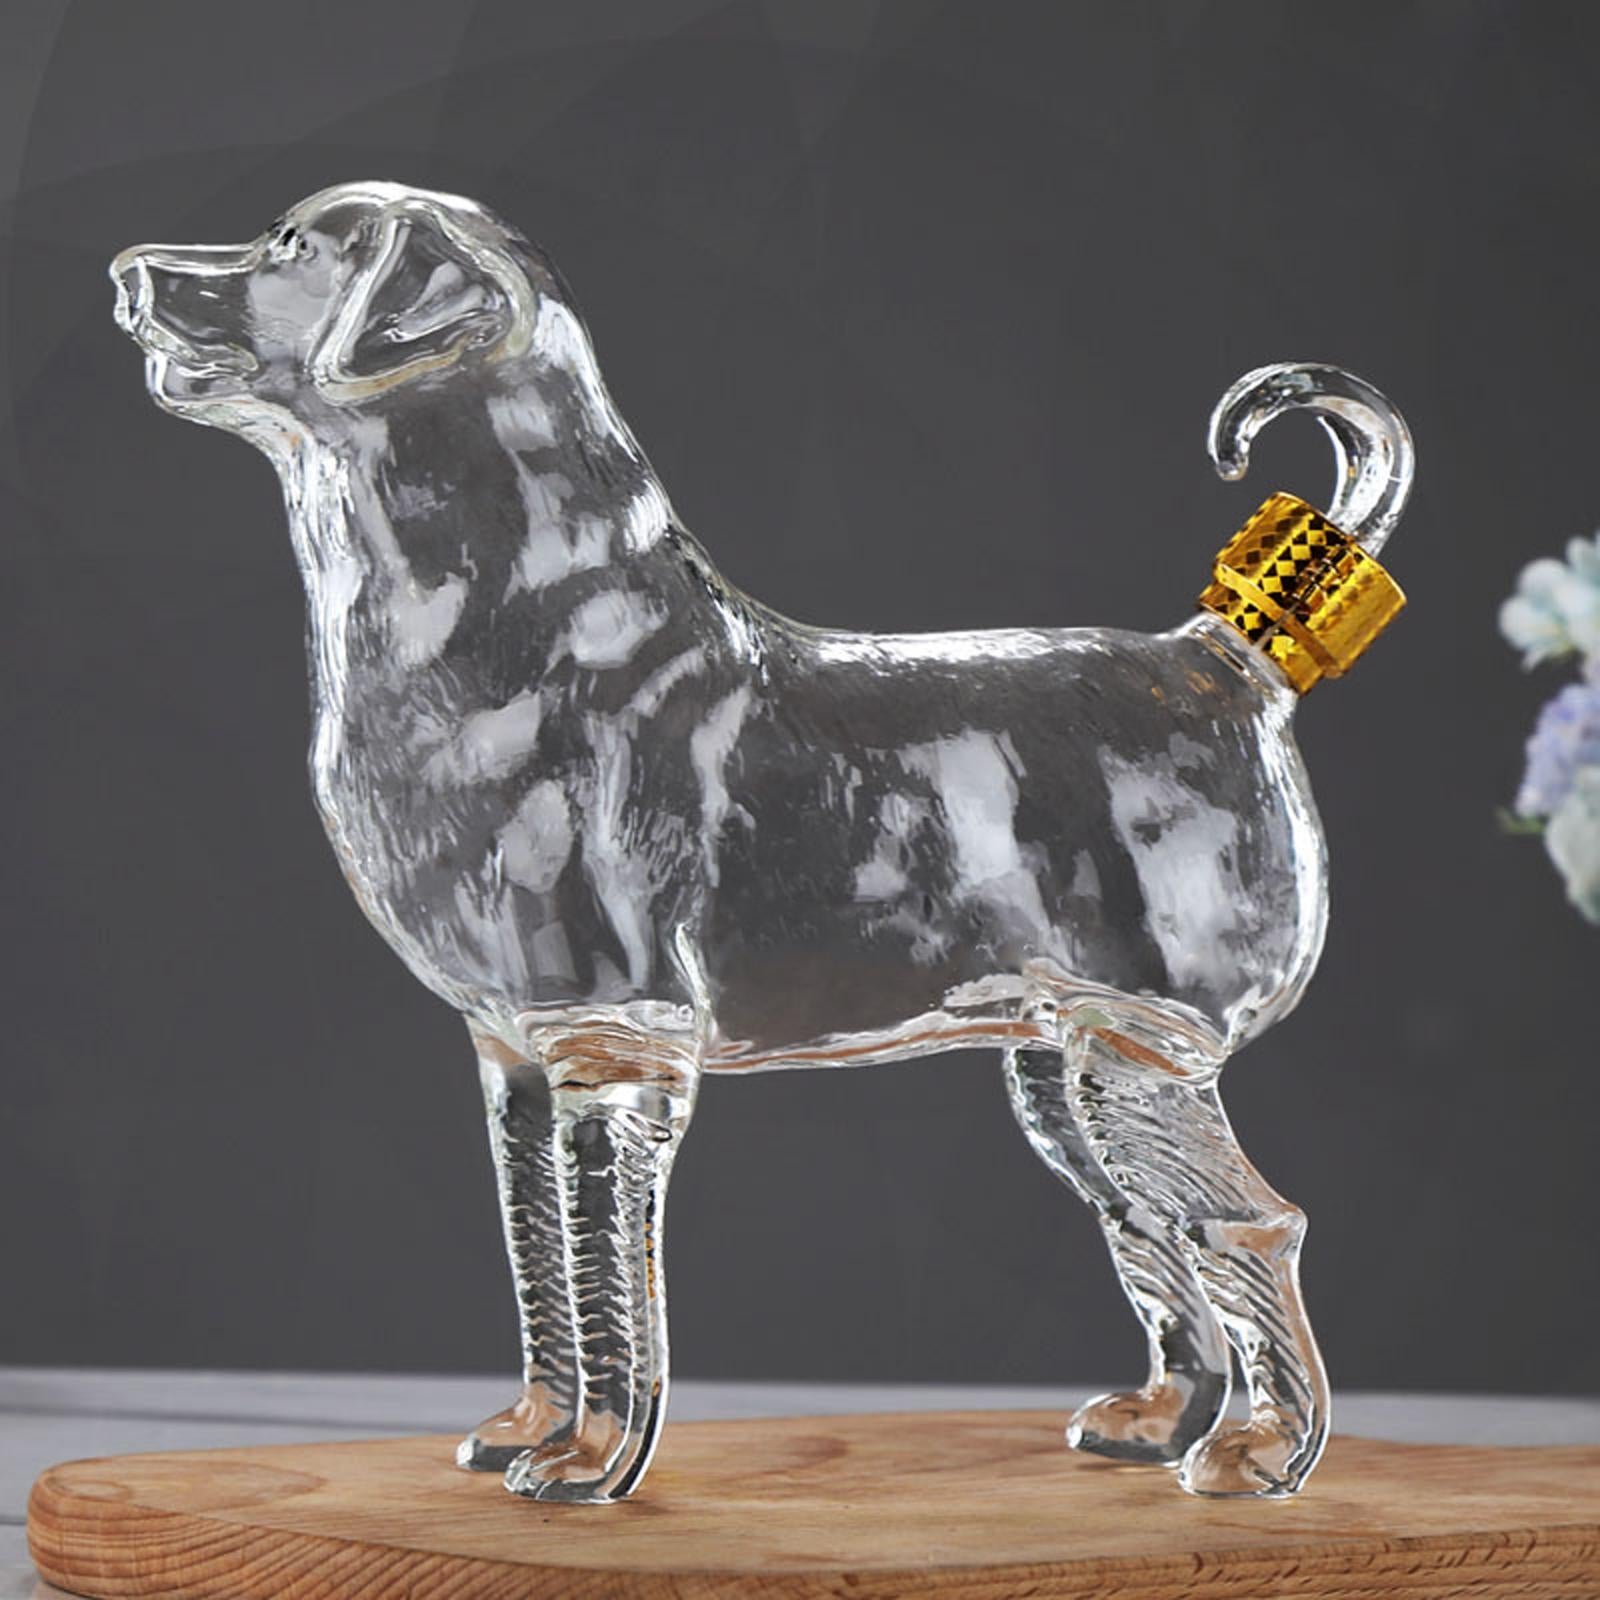 Unique dog shape whiskey container by Glasscias